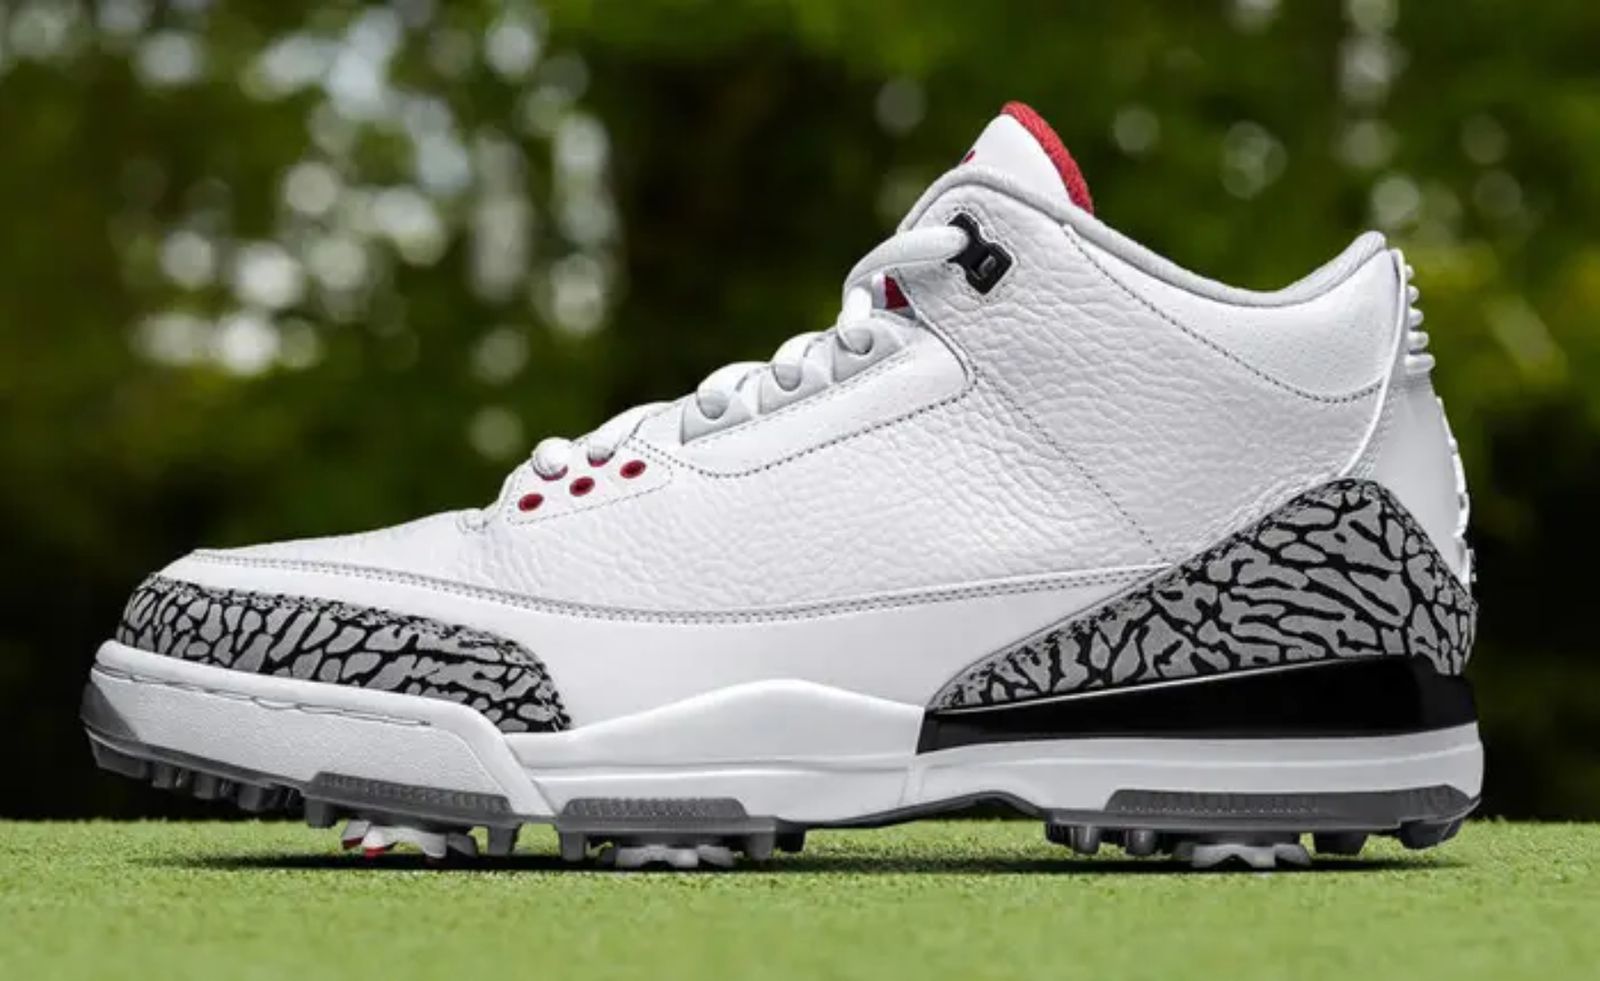 Air Jordan 3 Golf "White Cement" product image of a single white shoe with grey and black details around the heel and toe.